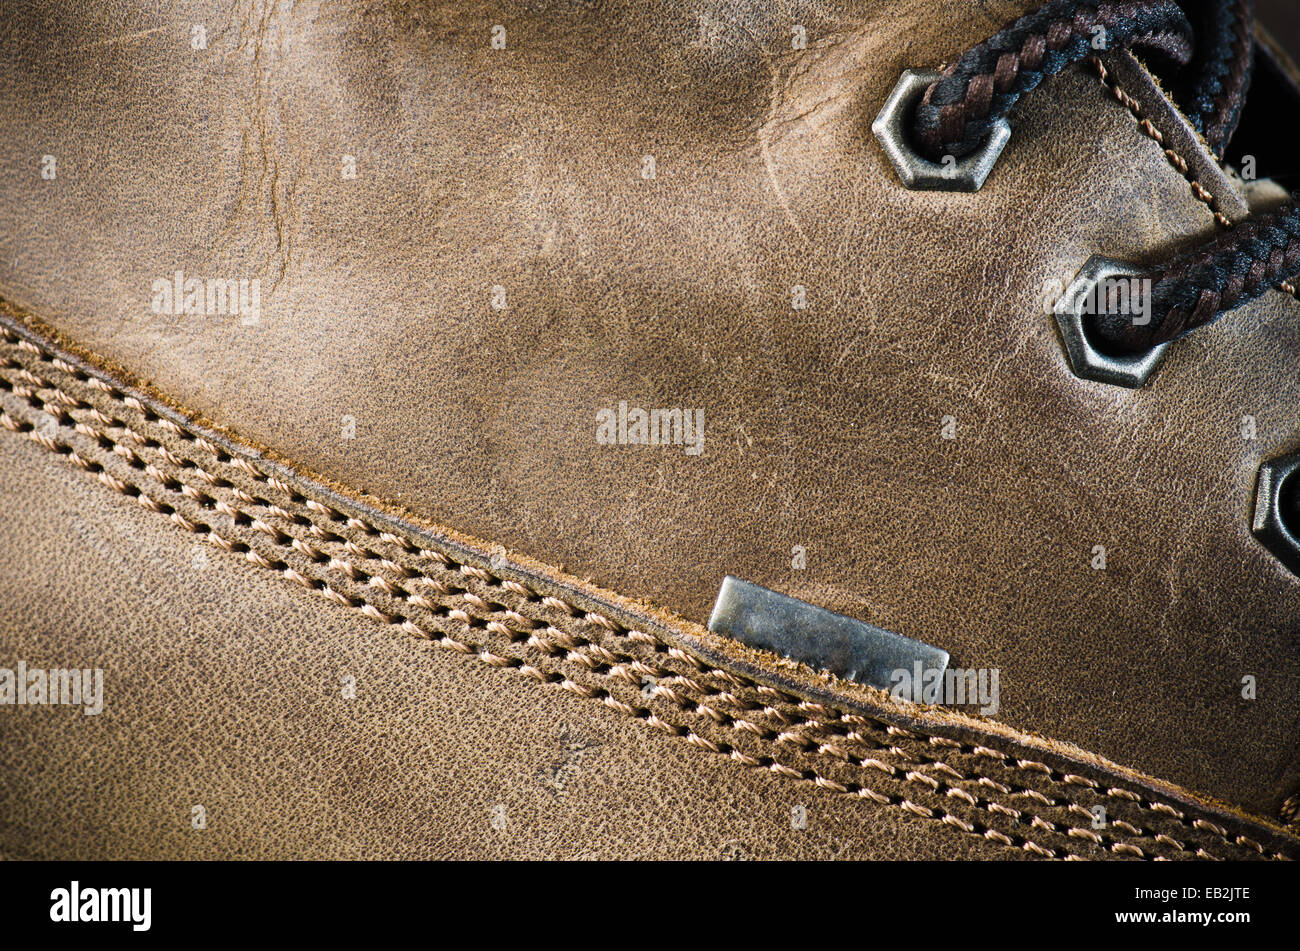 Brown leather shoe, close-up Stock Photo